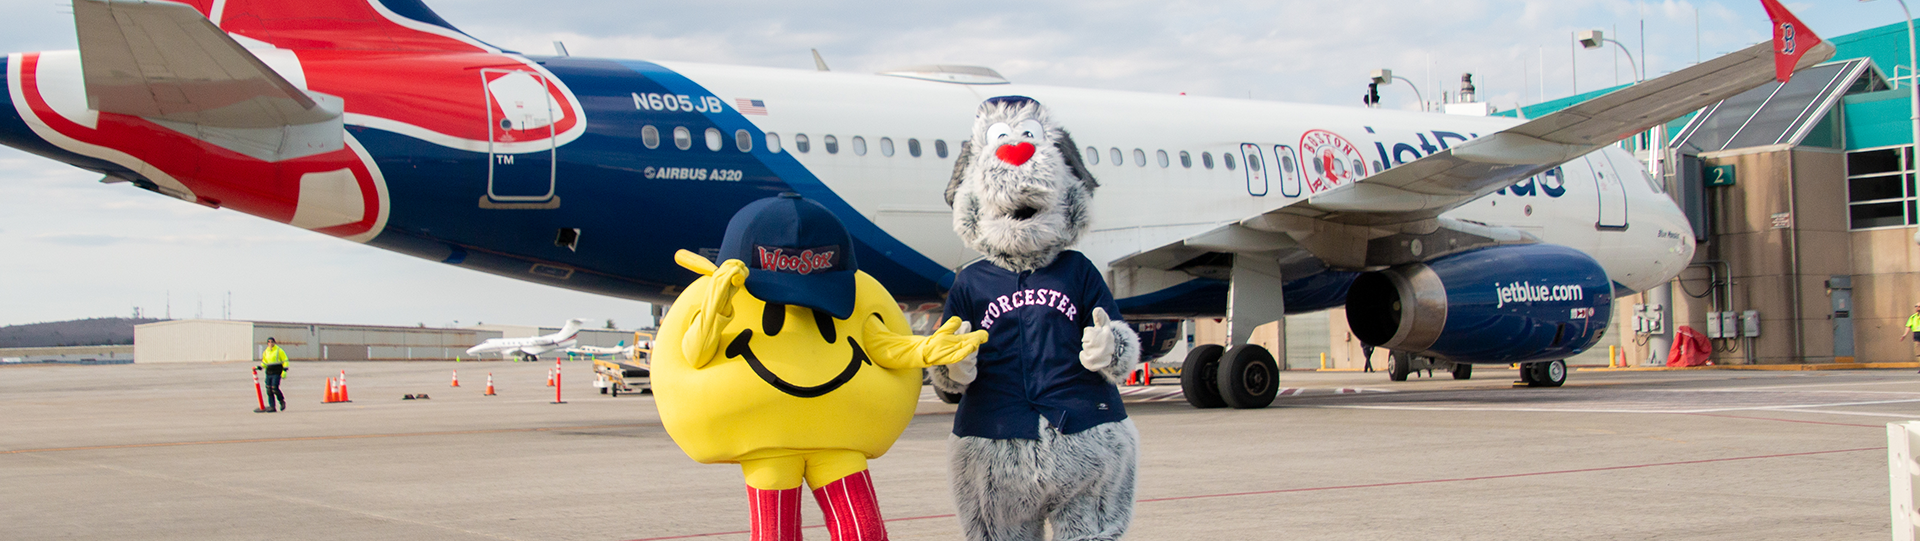 WooSox mascots at the airport with plane in the background